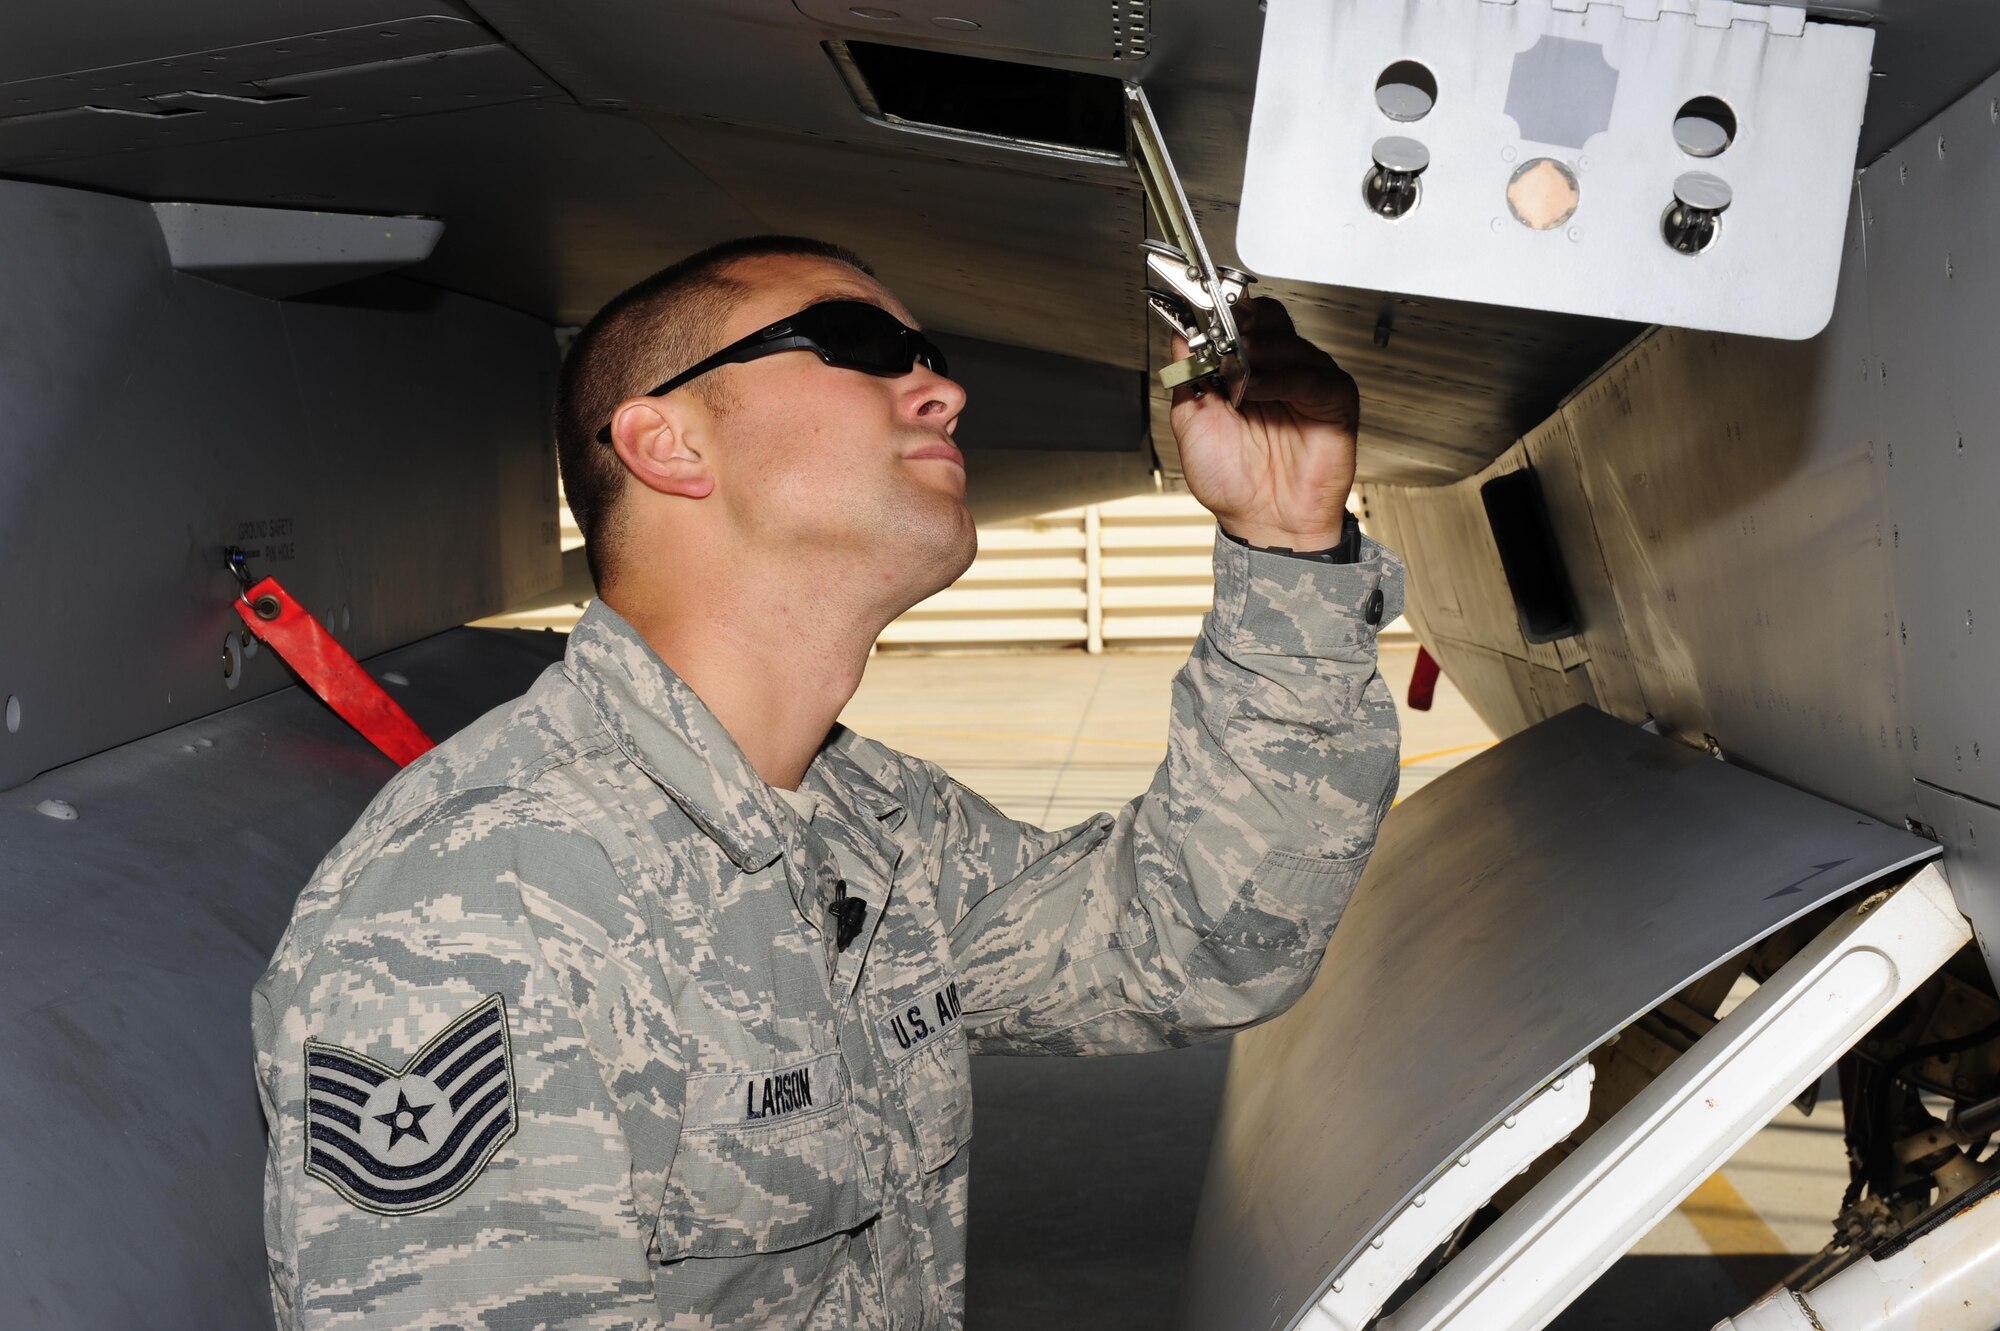 U.S. Air Force Tech. Sgt. Brett Larson, 134th Expeditionary Fighter Squadron F-16 Fighting Falcon crew chief, Vermont Air National Guard, inspects a hydraulic reservoir gage at Kunsan Air Base, Republic of Korea, Oct. 6, 2015. The 134th EFS was redeployed from Kadena Air Base, Japan to Kunsan AB as part of a theater security package. Larson deployed to Kunsan with more than 200 other guardsmen as part of a theater security package to increase large force U.S. military combat capabilities. (U.S. Air Force photo by Staff Sgt. Nick Wilson/Released)